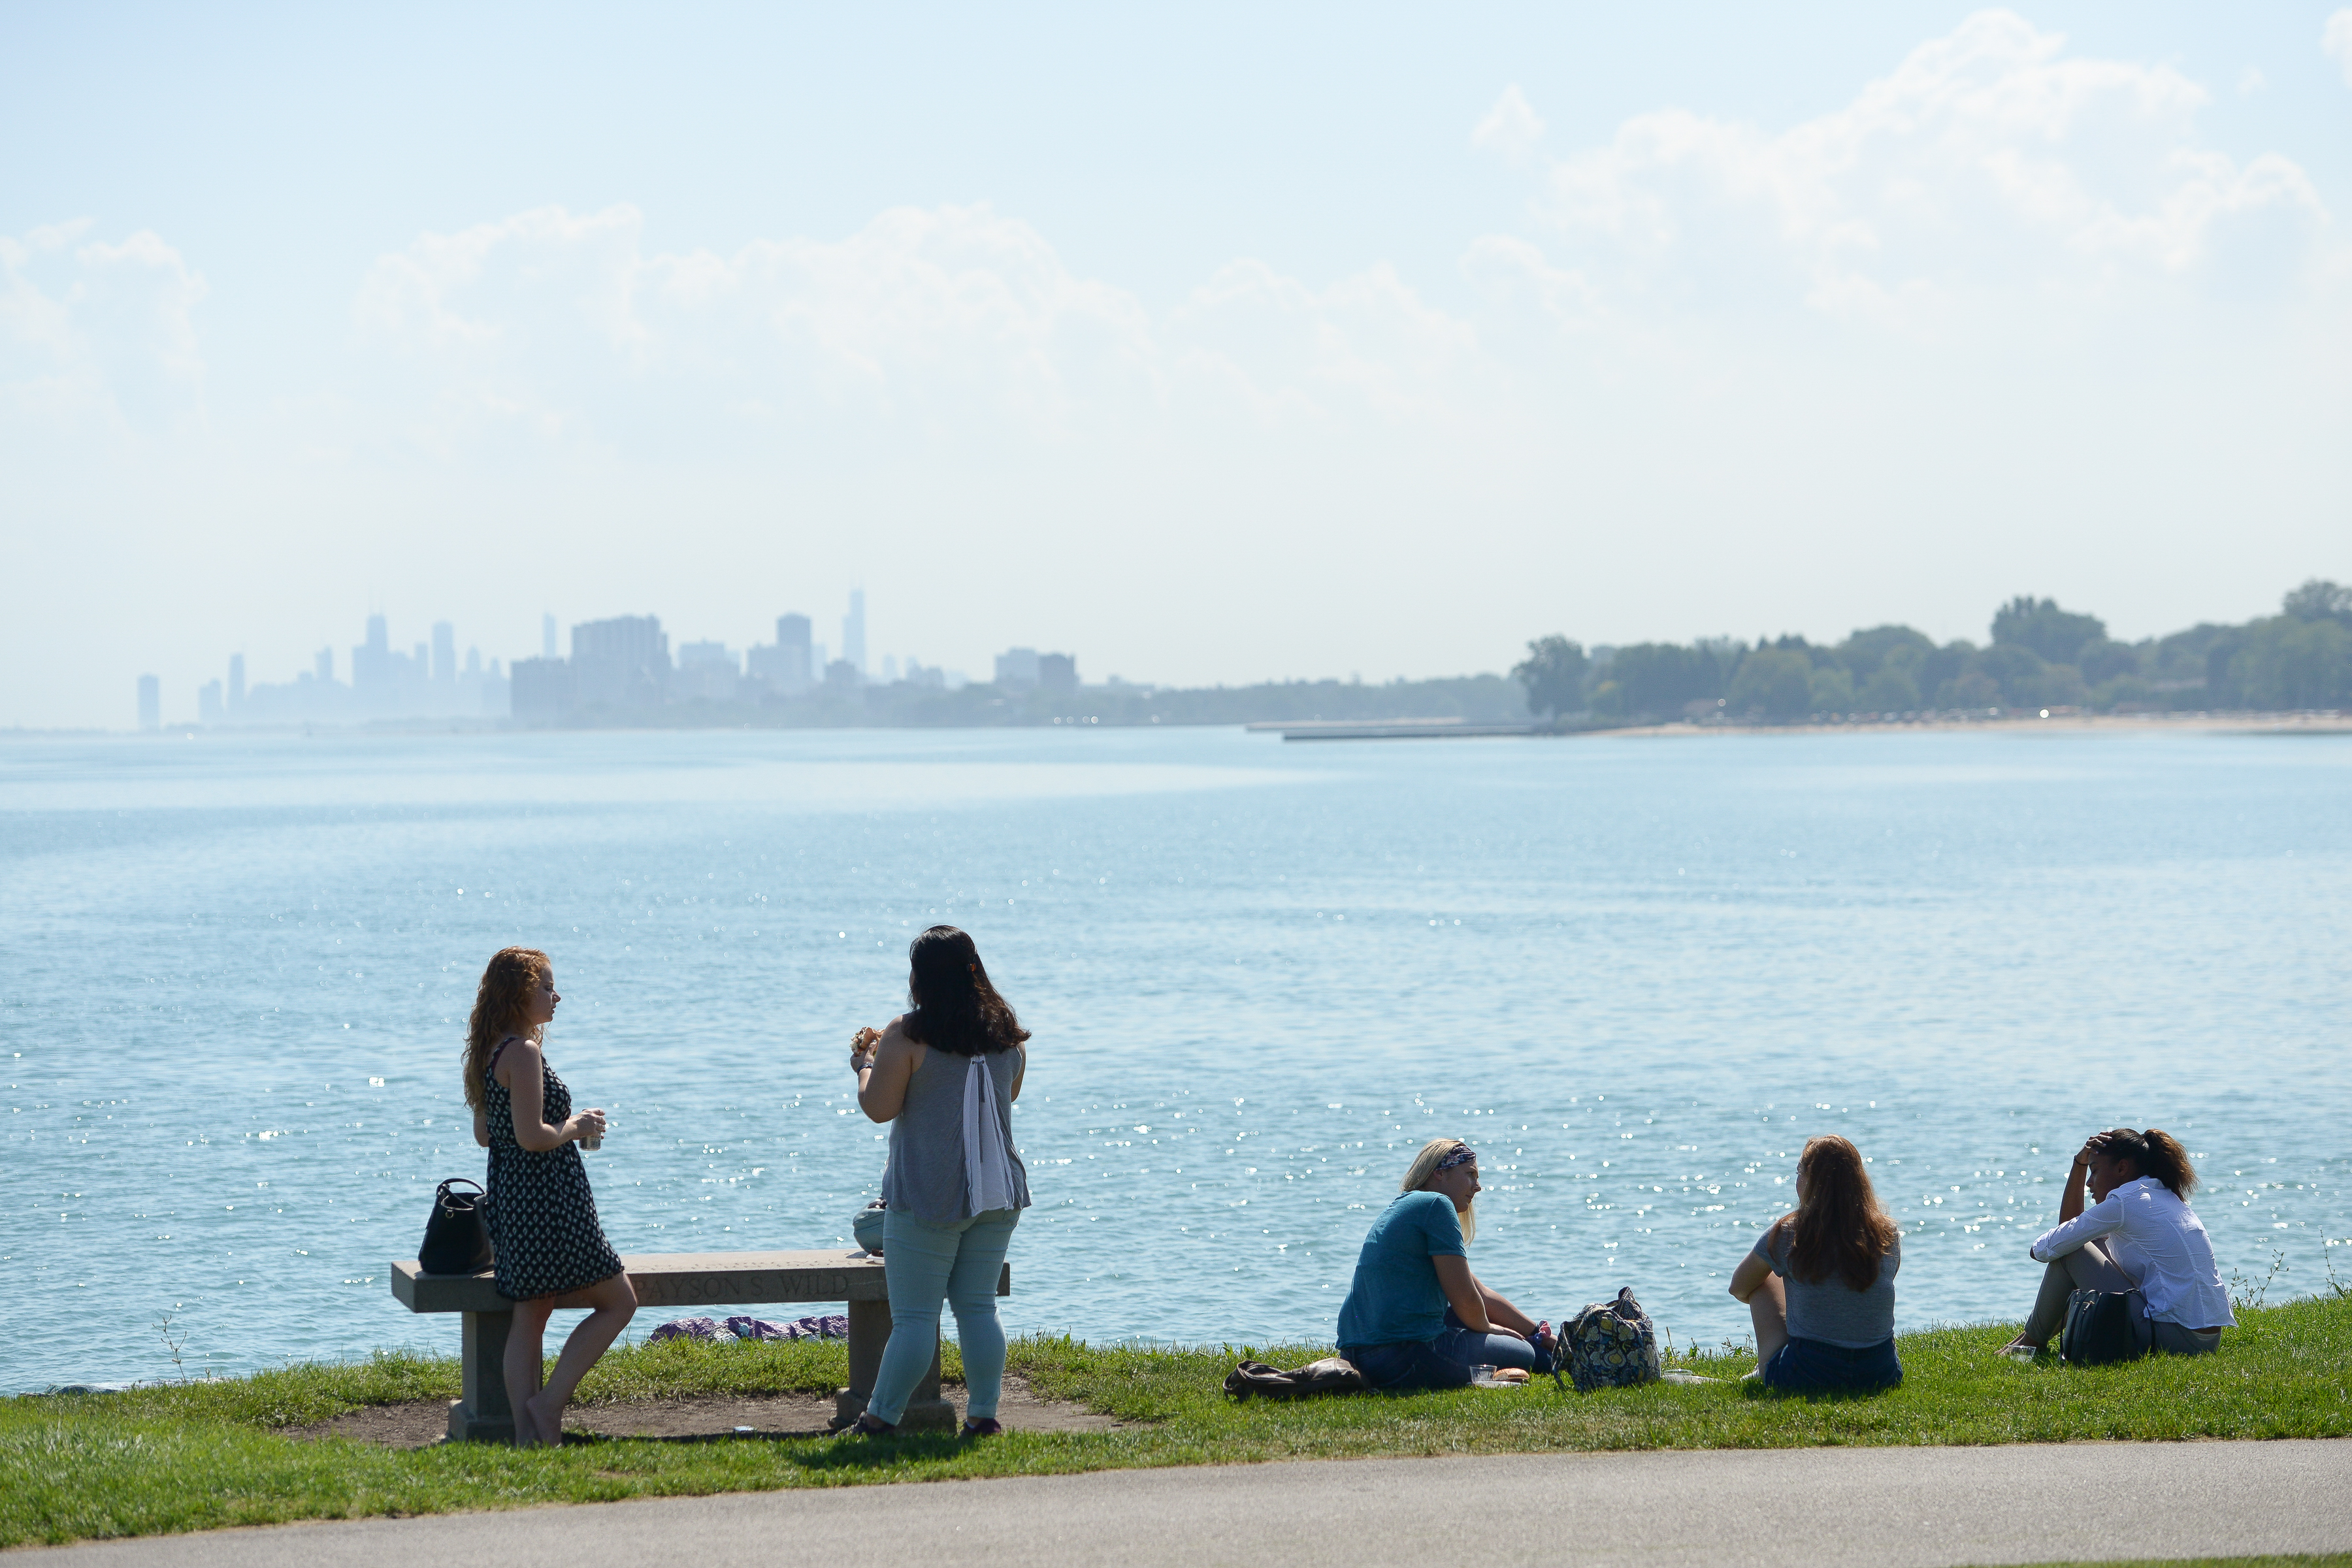 A group of students enjoy the view of the lakefill and the downtown Chicago skyline far off in the distance.